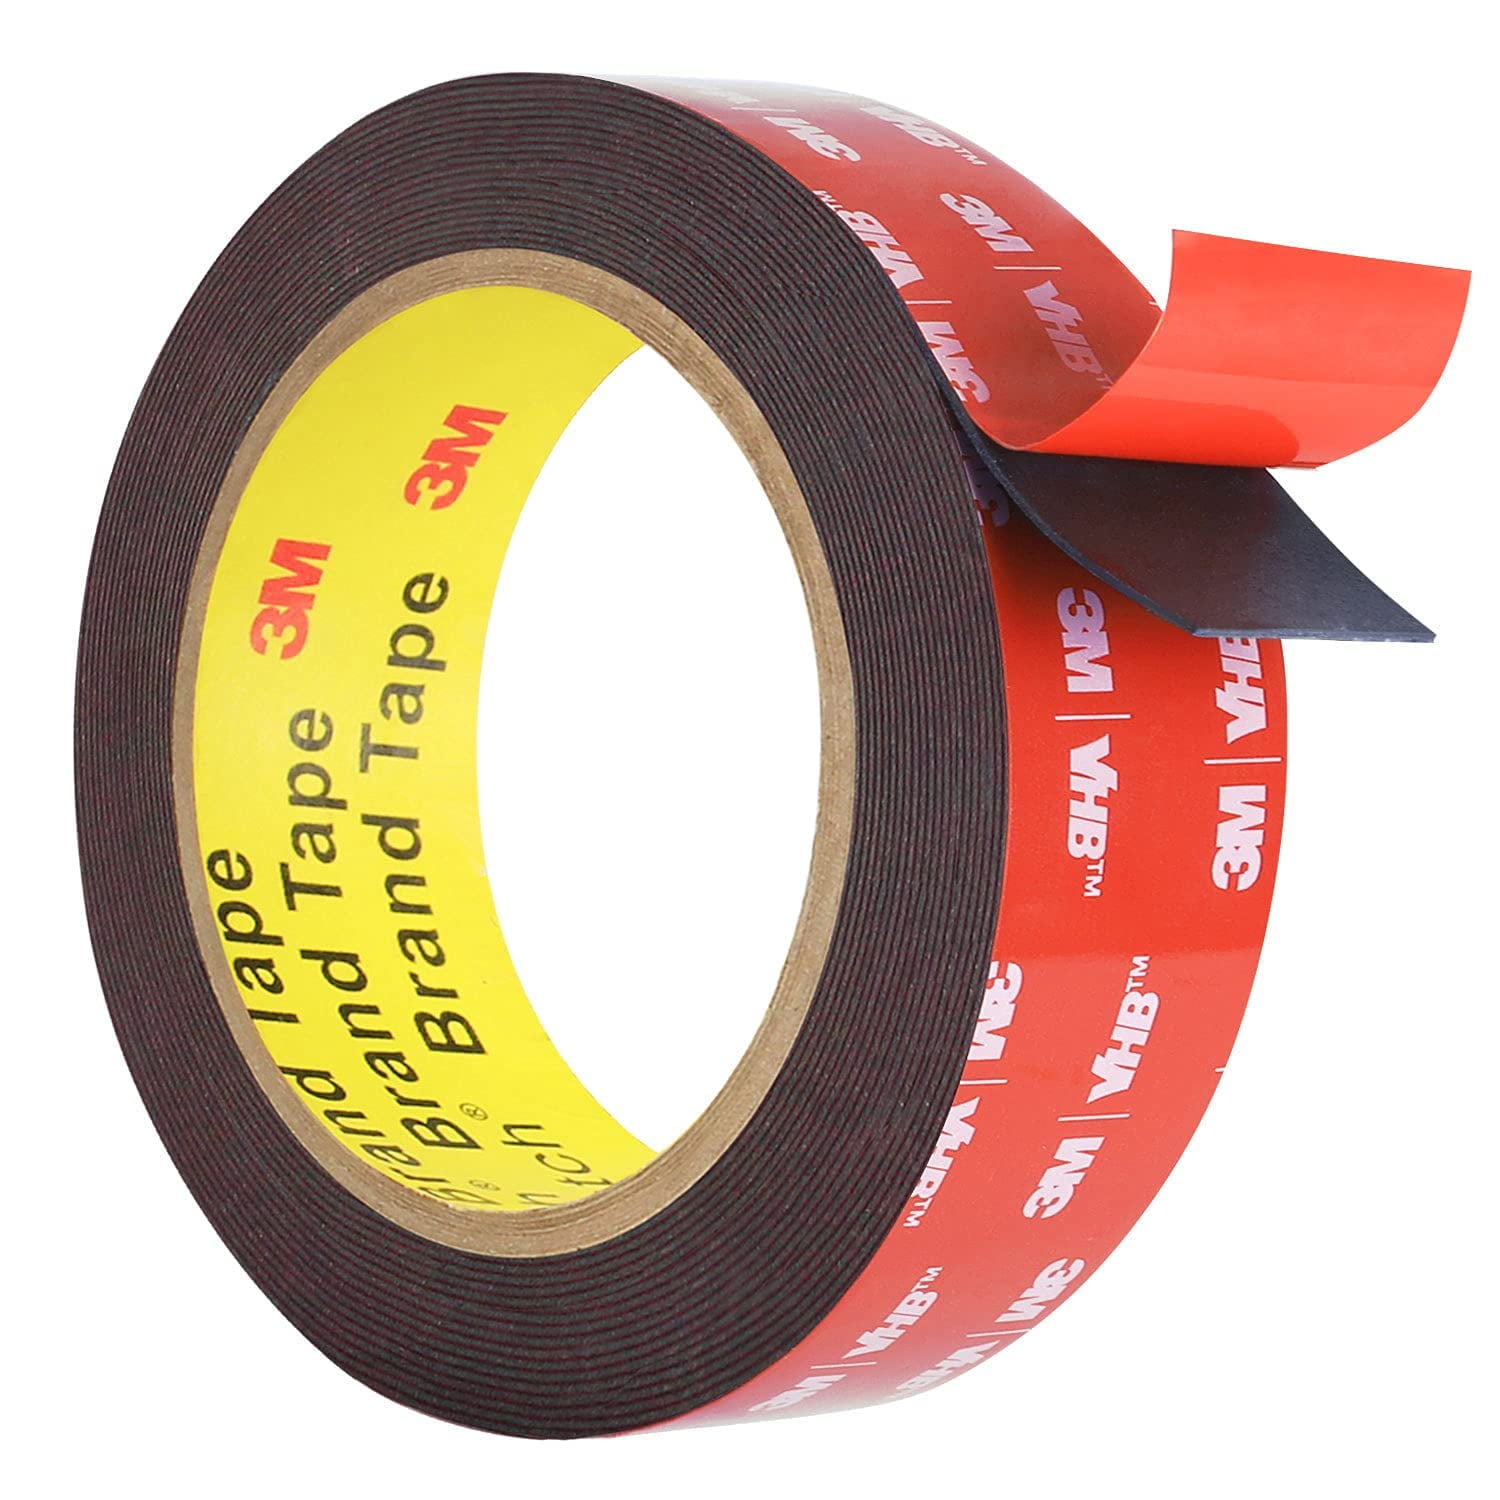 Double Sided Tape, ReShin Tape Removable Mounting Tape, Clear Tape Two  Sided Wall Tape Strips, Washable, Reusable, Double Stick Tape Strong  Adhesive